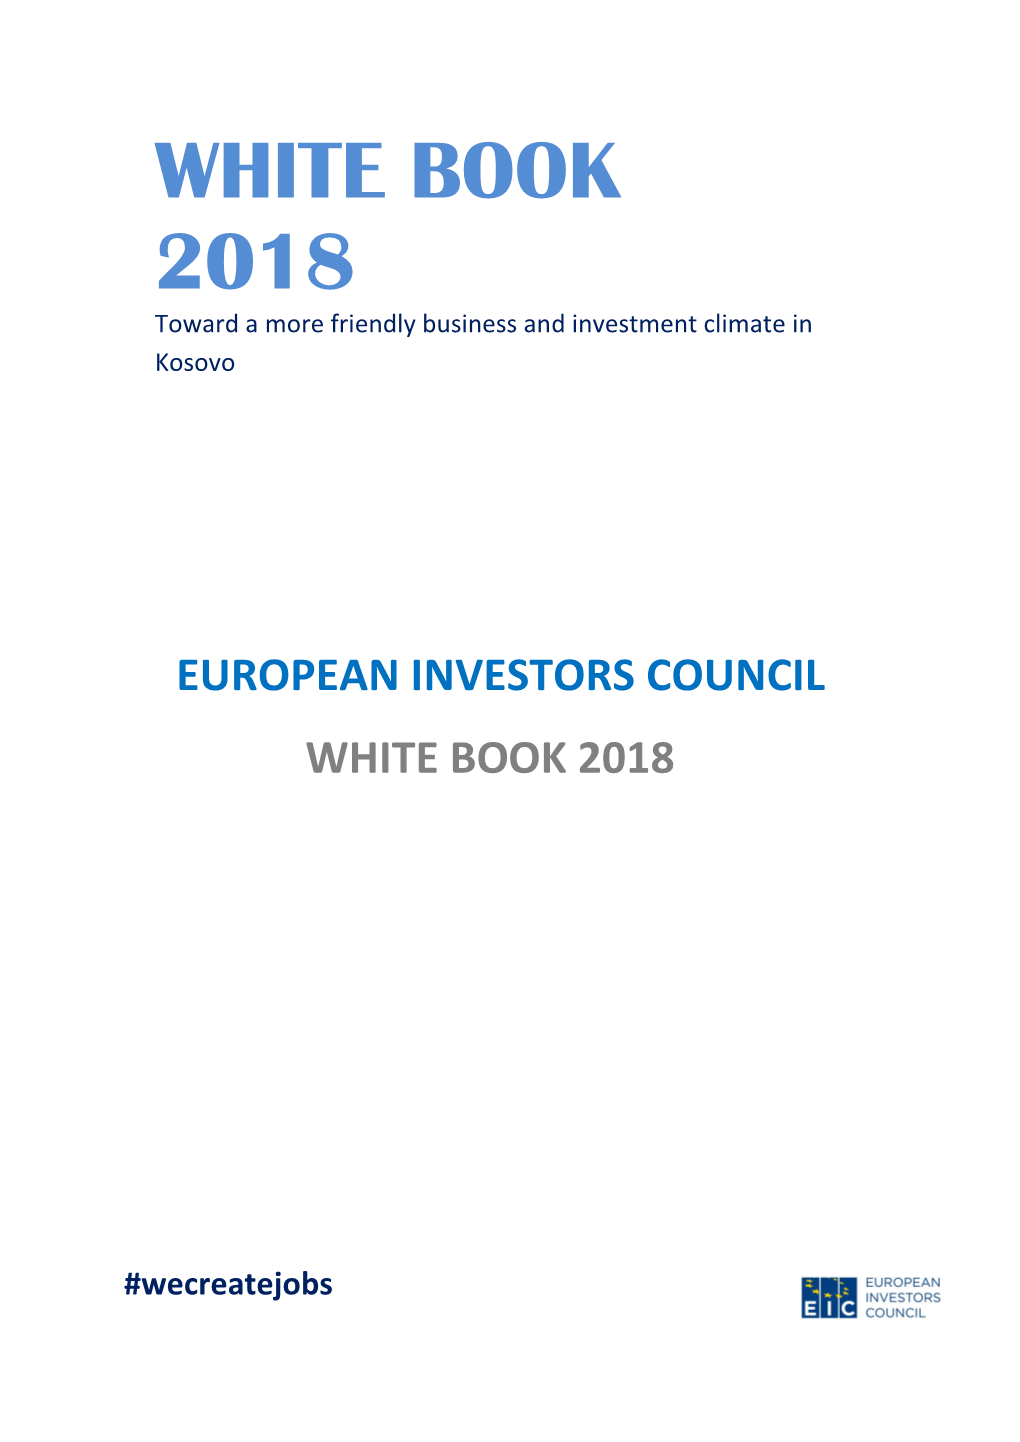 WHITE BOOK 2018 Toward a More Friendly Business and Investment Climate in Kosovo